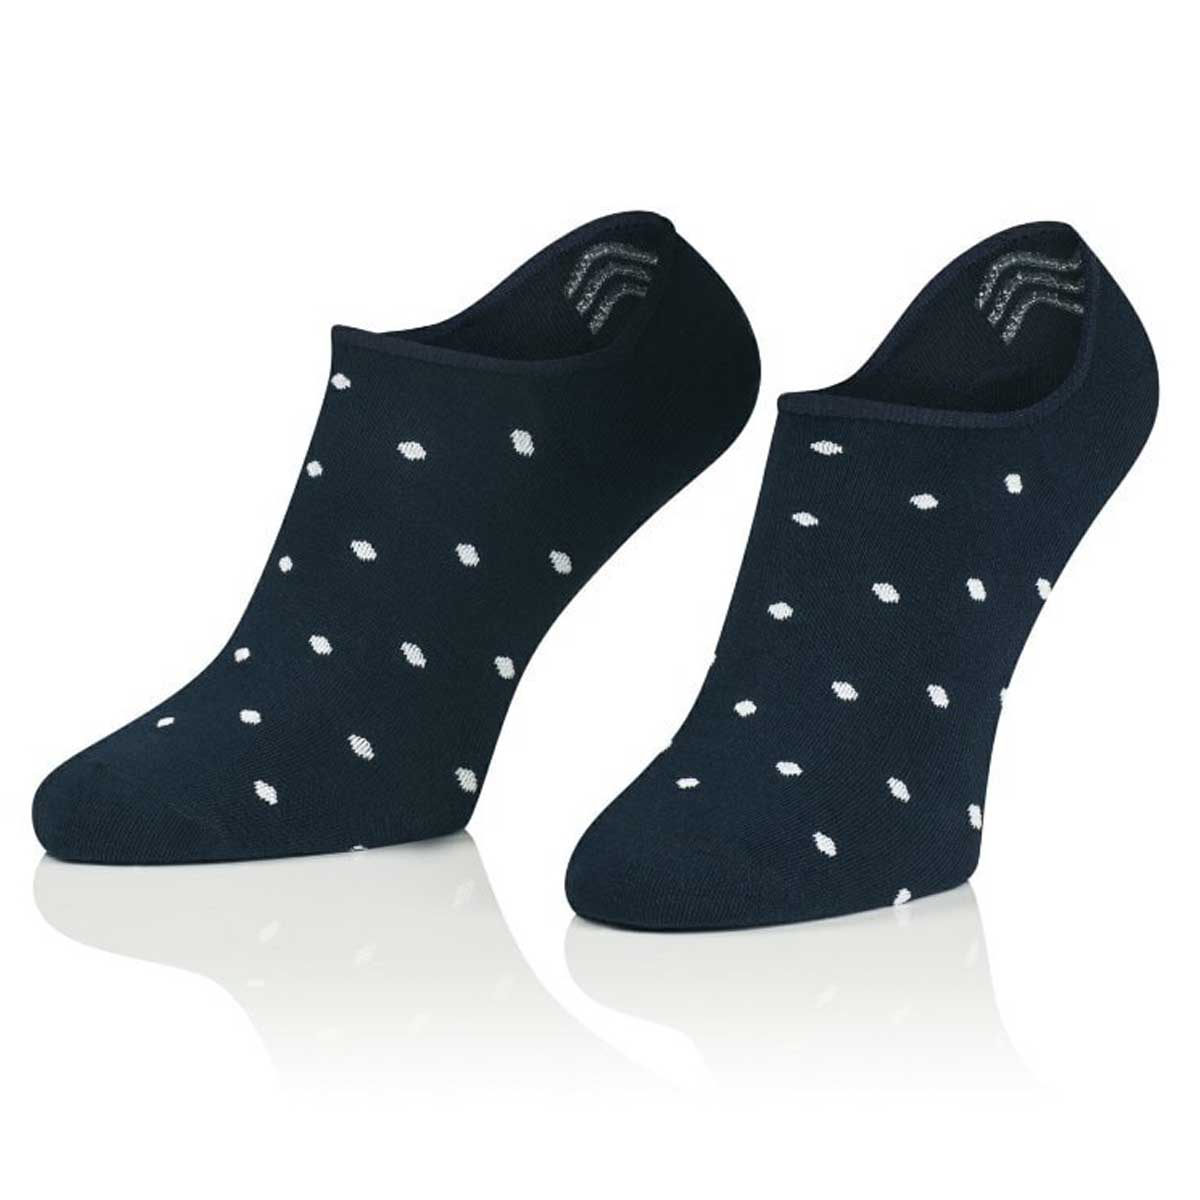 Cotton men&#39;s navy blue no show socks with white dots